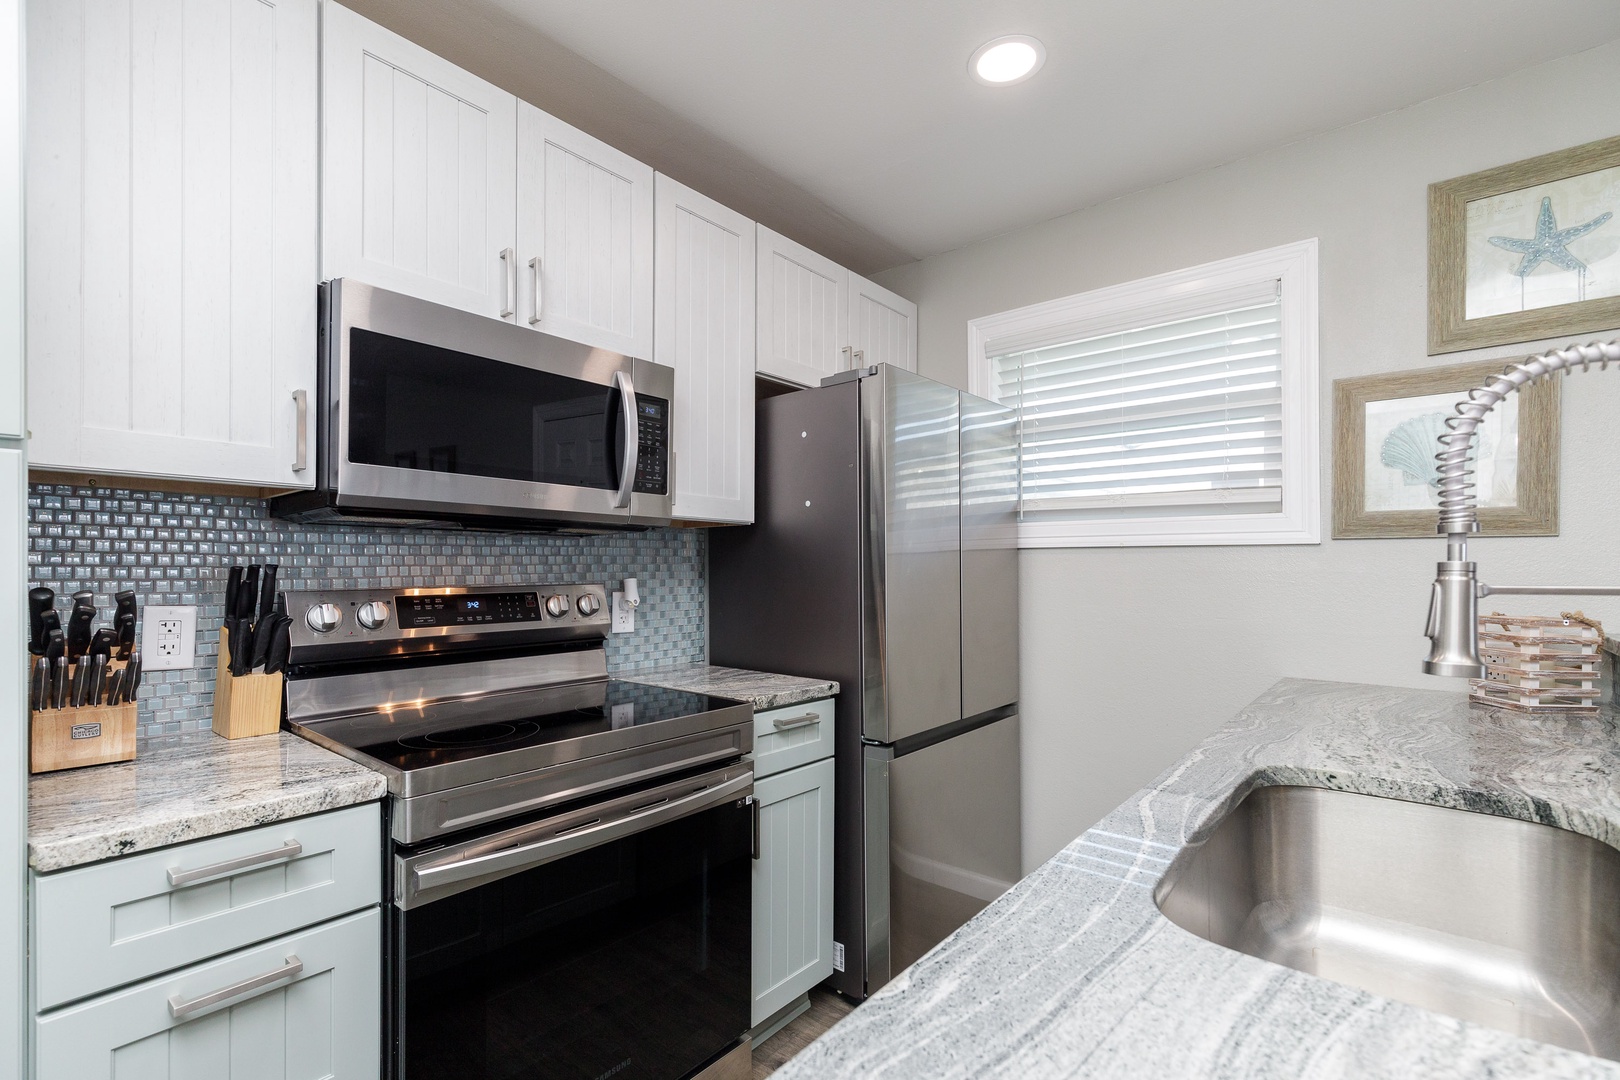 The updated, beachy kitchen offers ample space & all the comforts of home